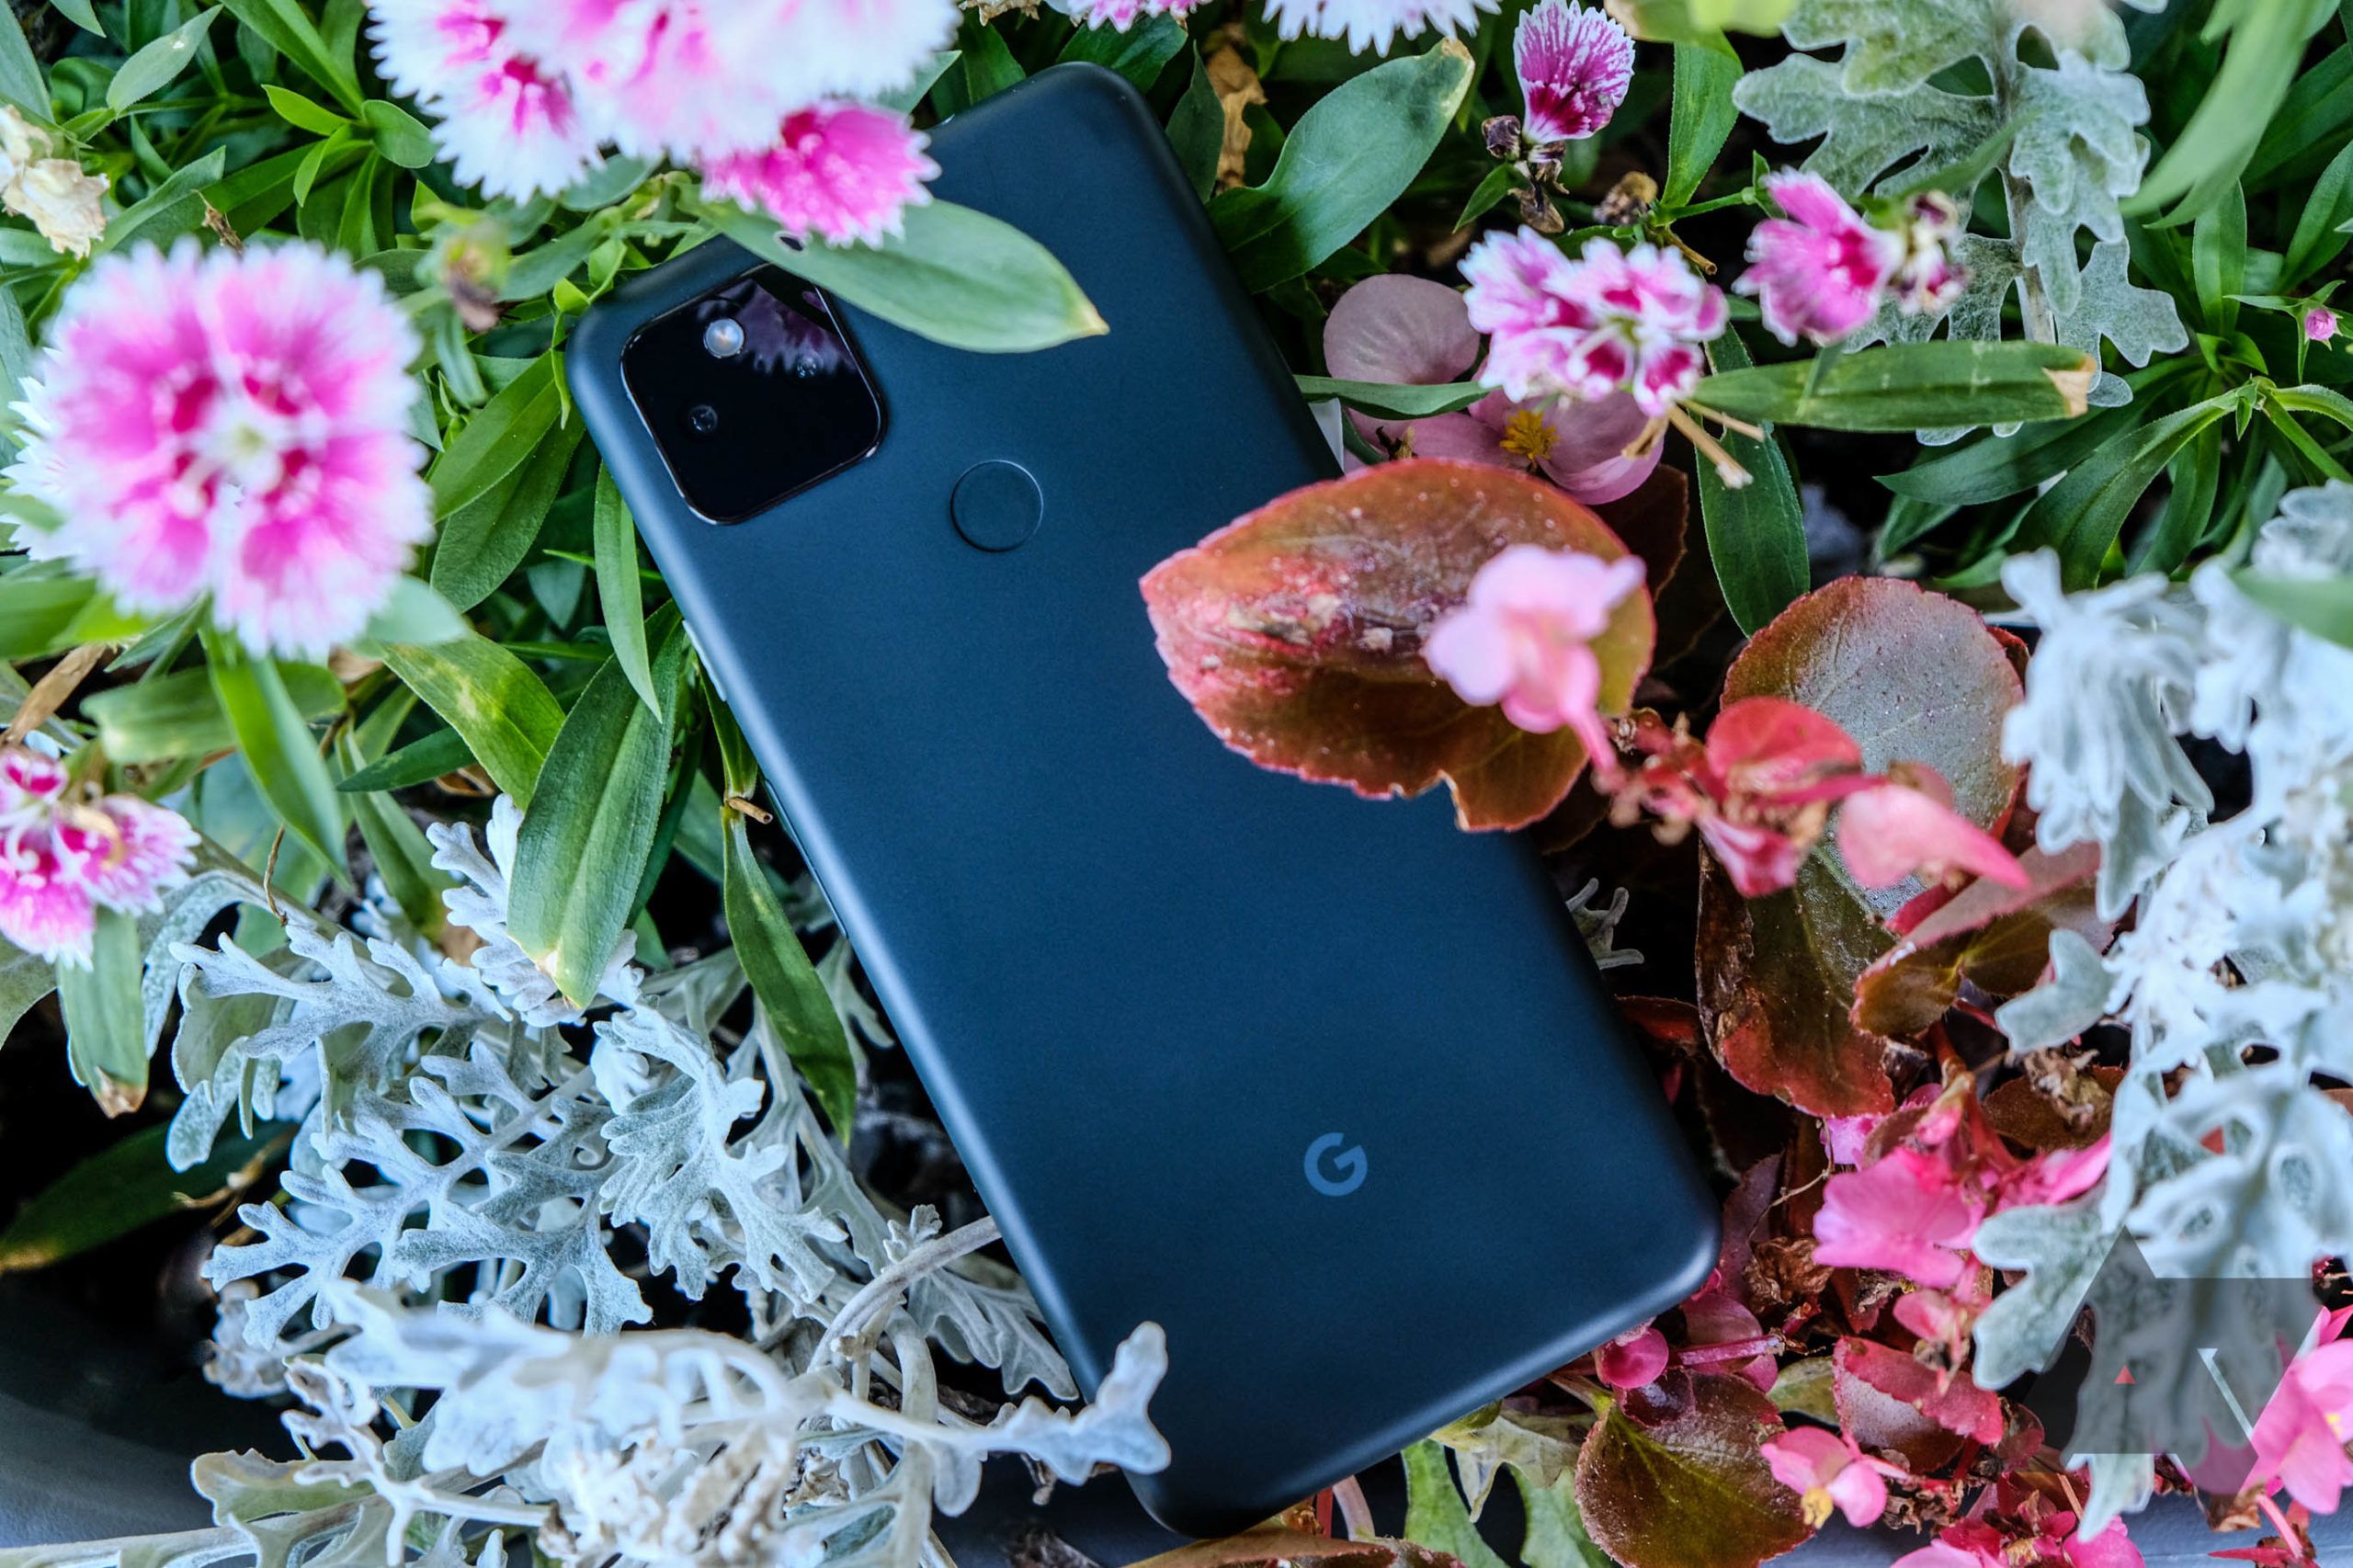 A Google Pixel 5a nestled in some flowers